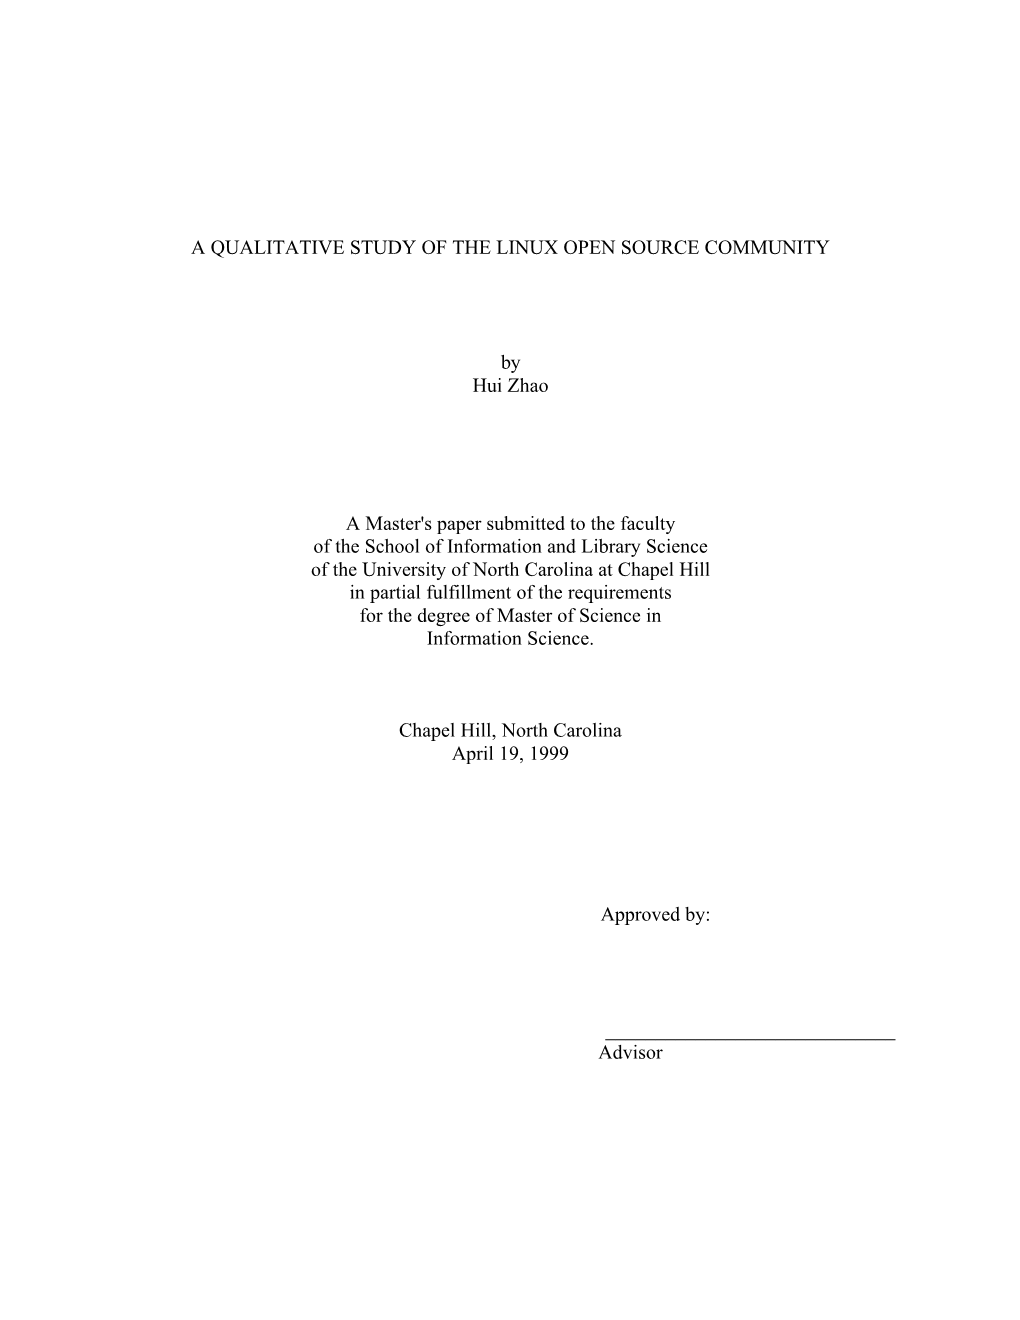 A QUALITATIVE STUDY of the LINUX OPEN SOURCE COMMUNITY by Hui Zhao a Master's Paper Submitted to the Faculty of the School of In